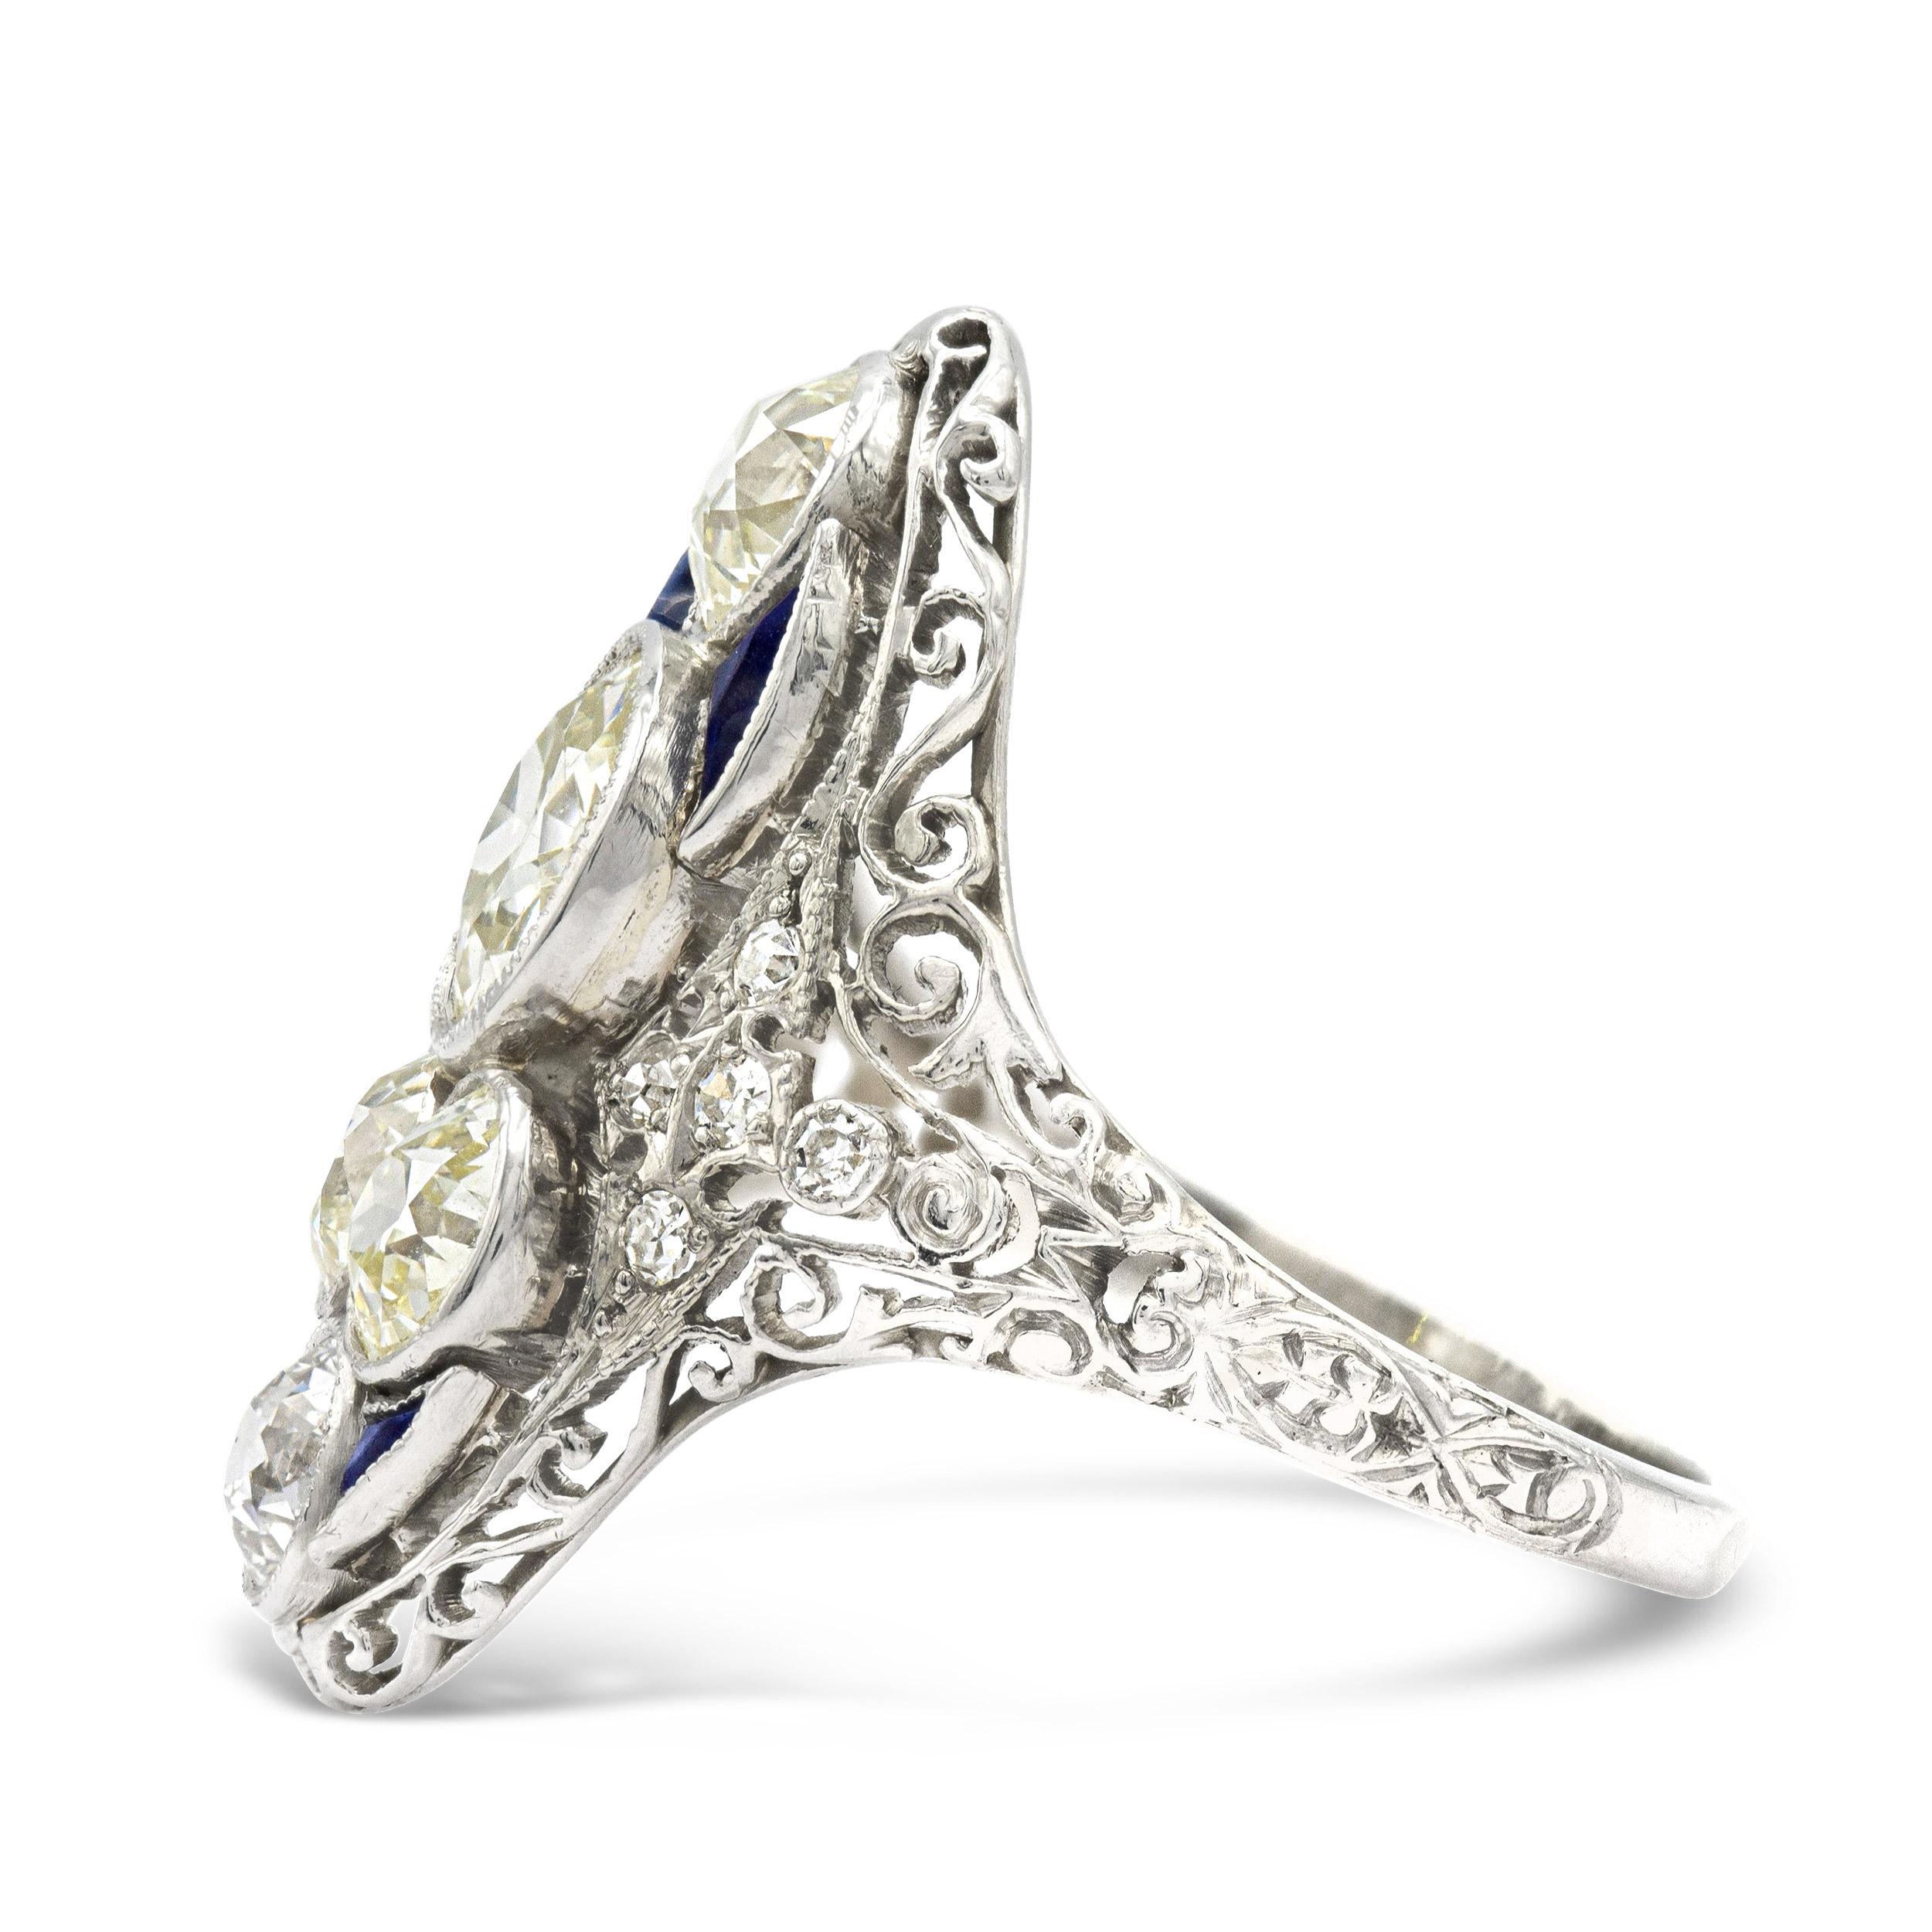 Old European Cut Art Deco 1.89 Ct. Diamond and Sapphire Filigree Platinum Cocktail Ring For Sale